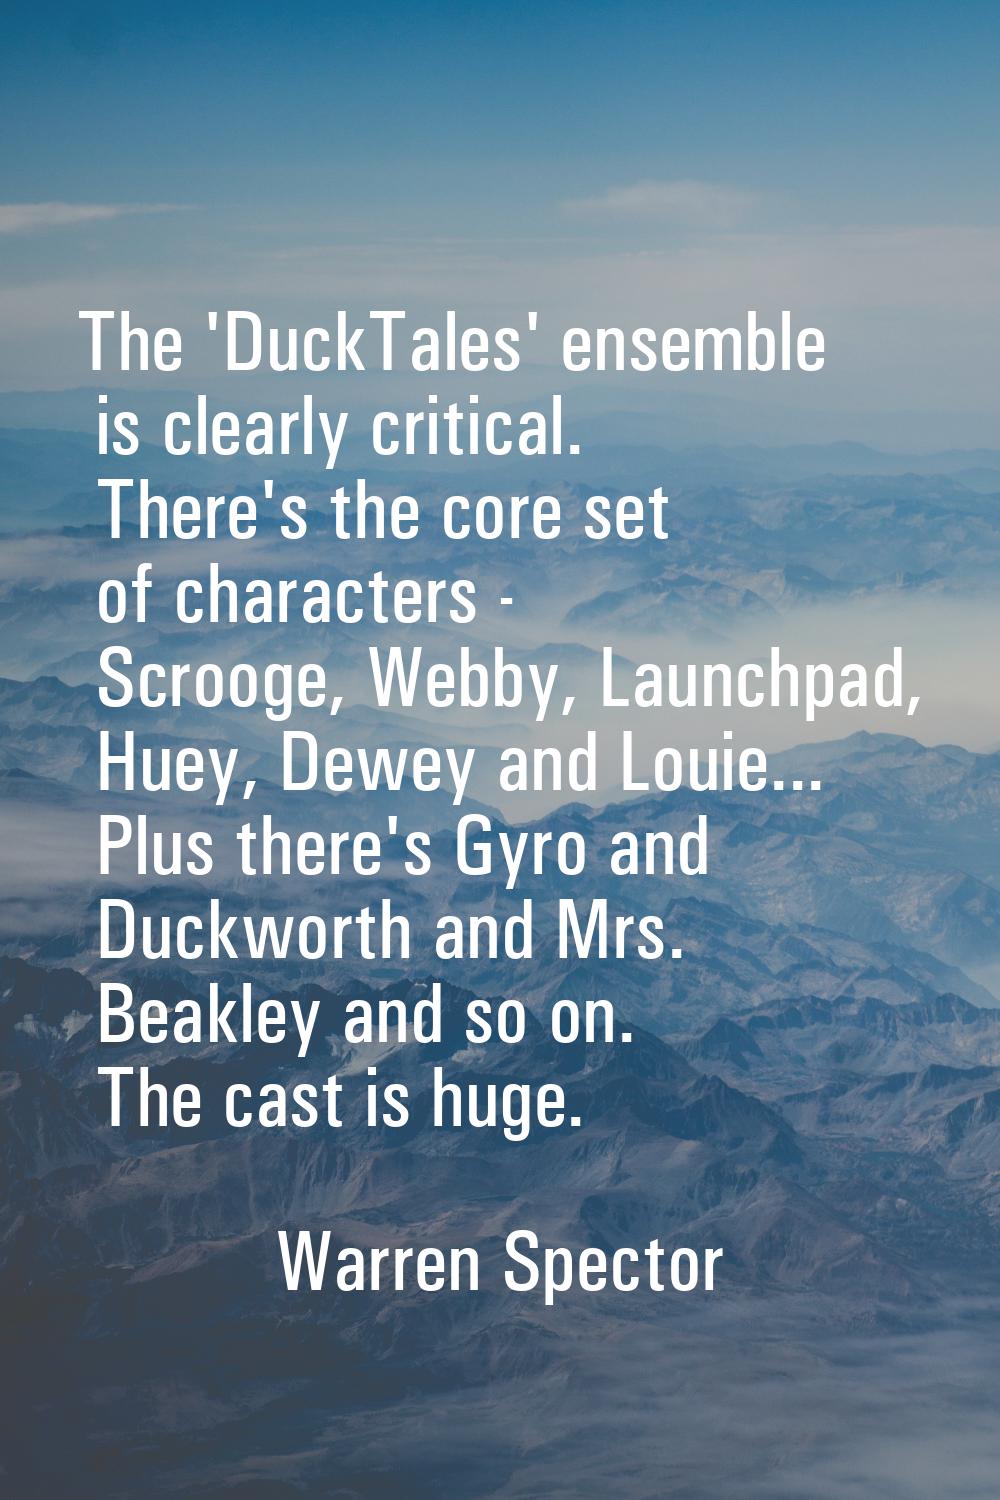 The 'DuckTales' ensemble is clearly critical. There's the core set of characters - Scrooge, Webby, 